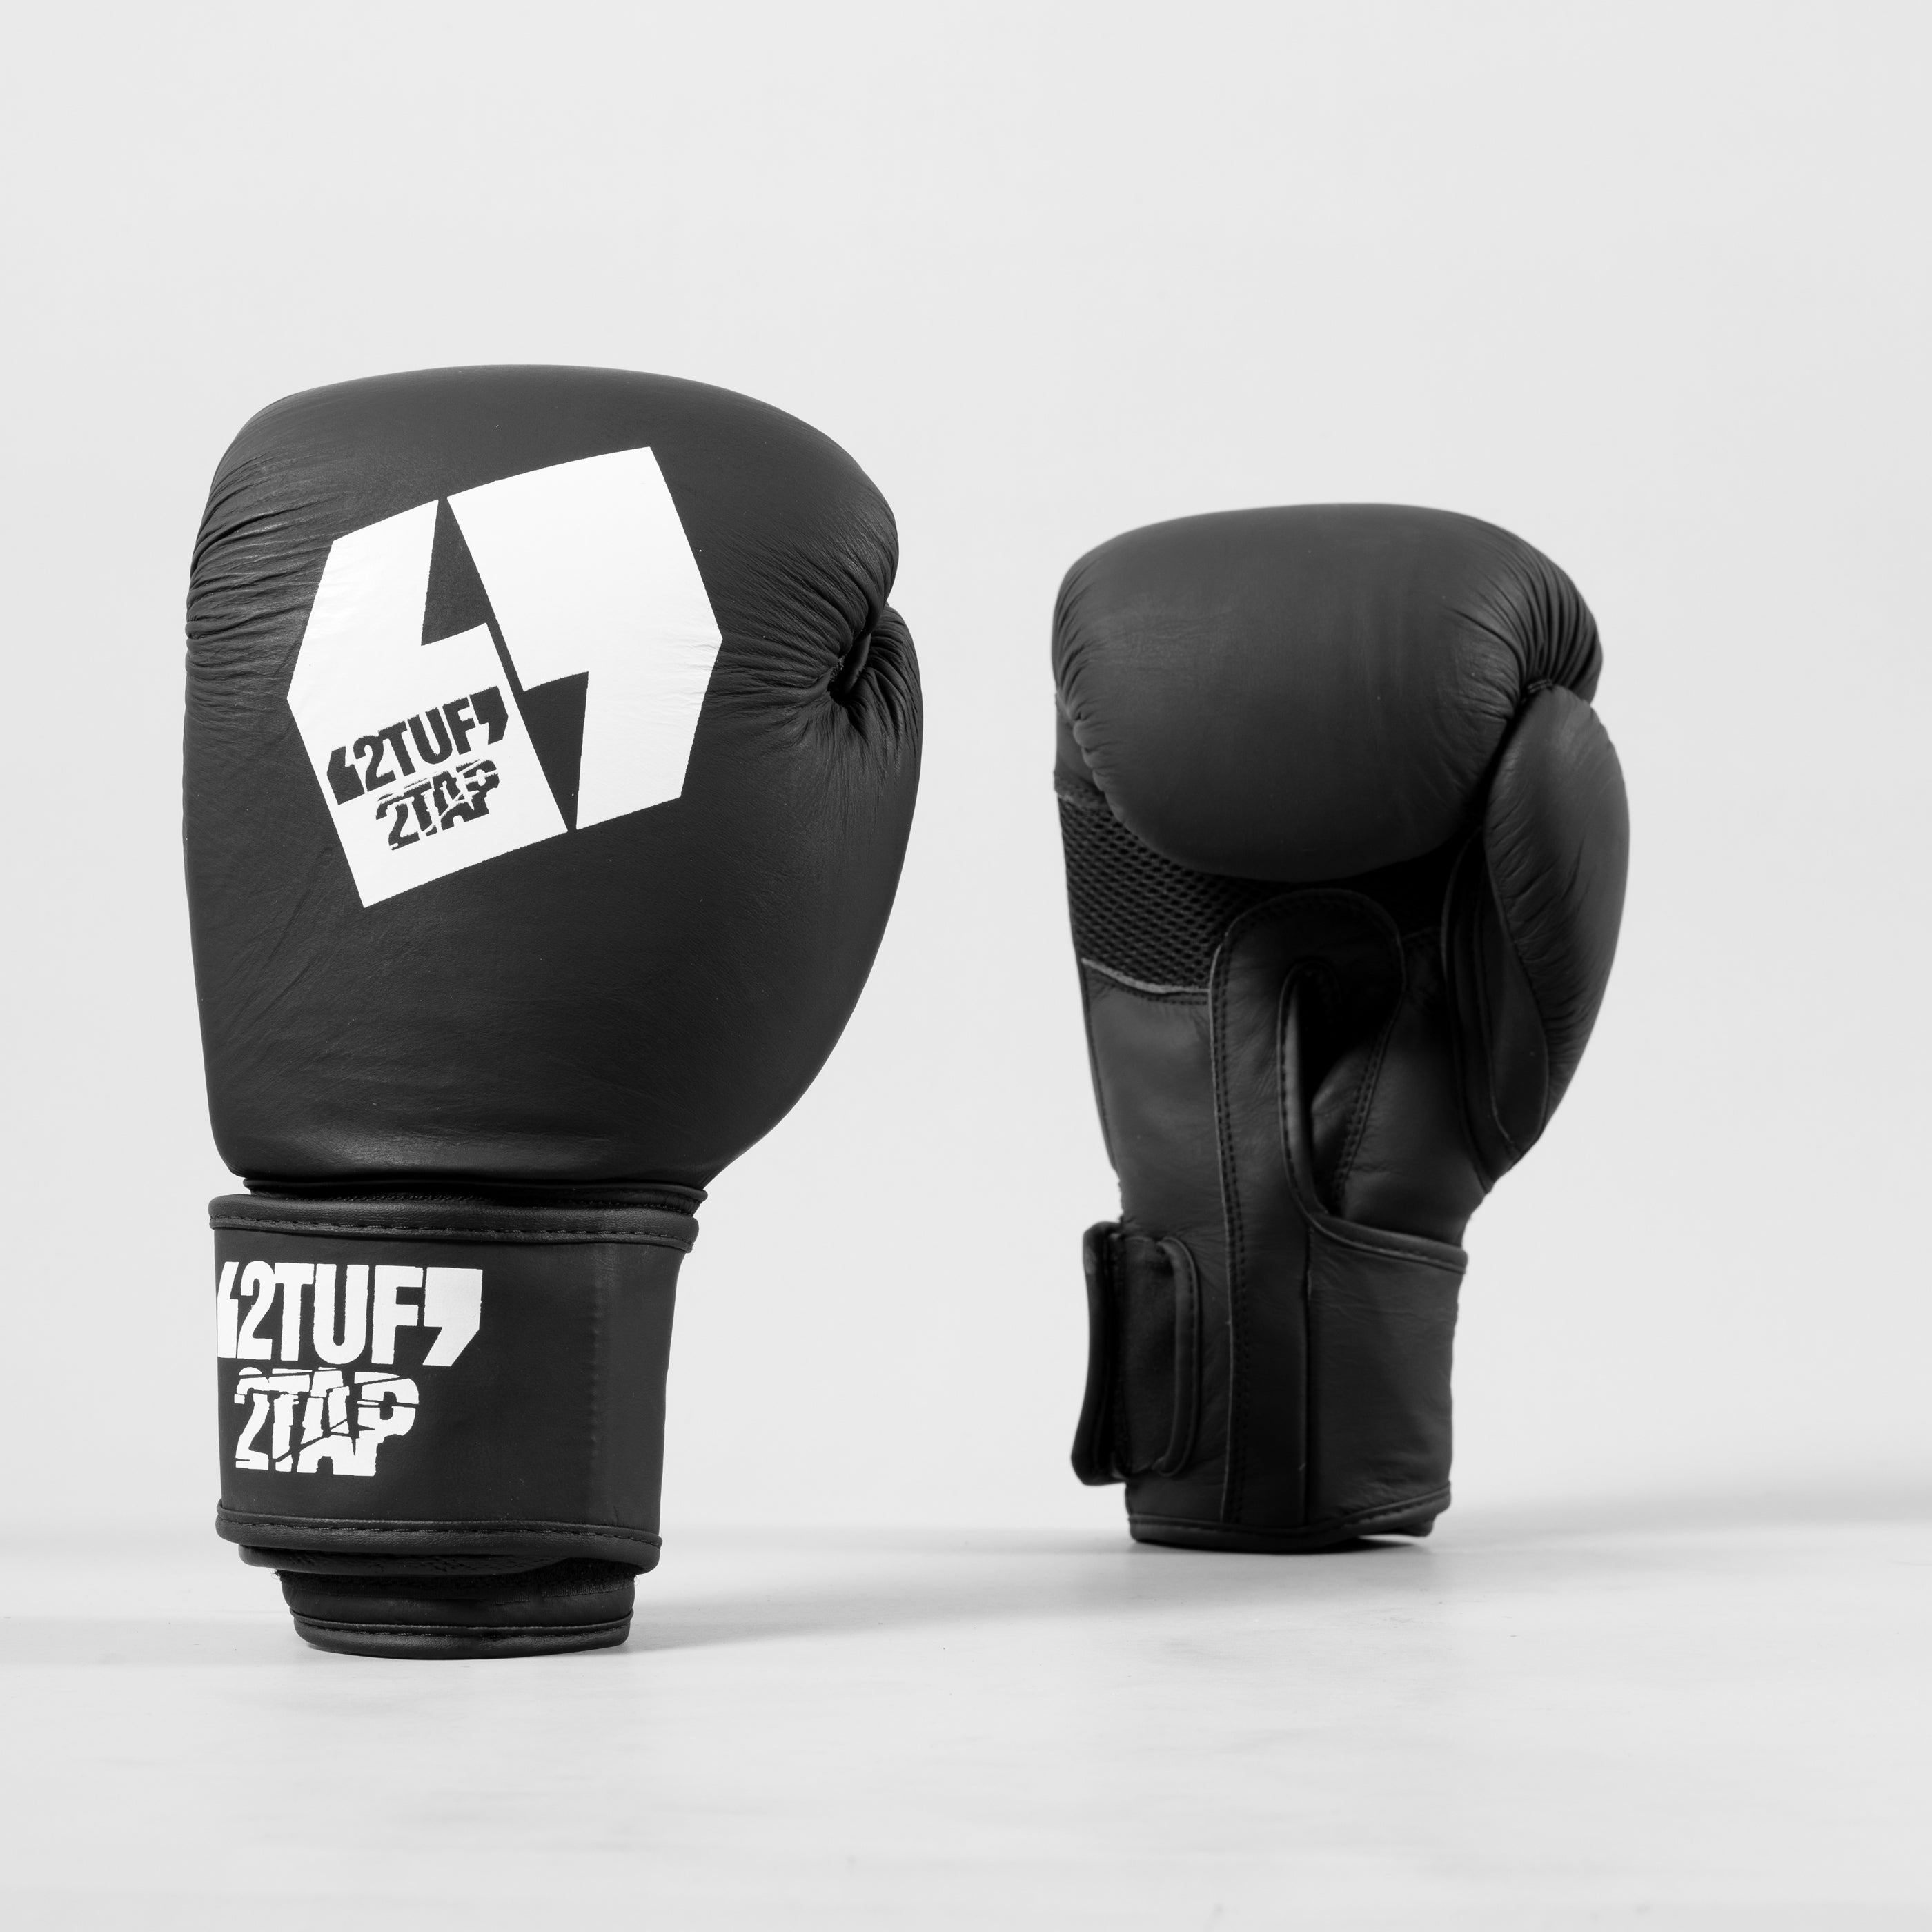 'Black Knight' Professional Boxing Gloves - Cowhide Leather - Matte Black/White 2TUF2TAP